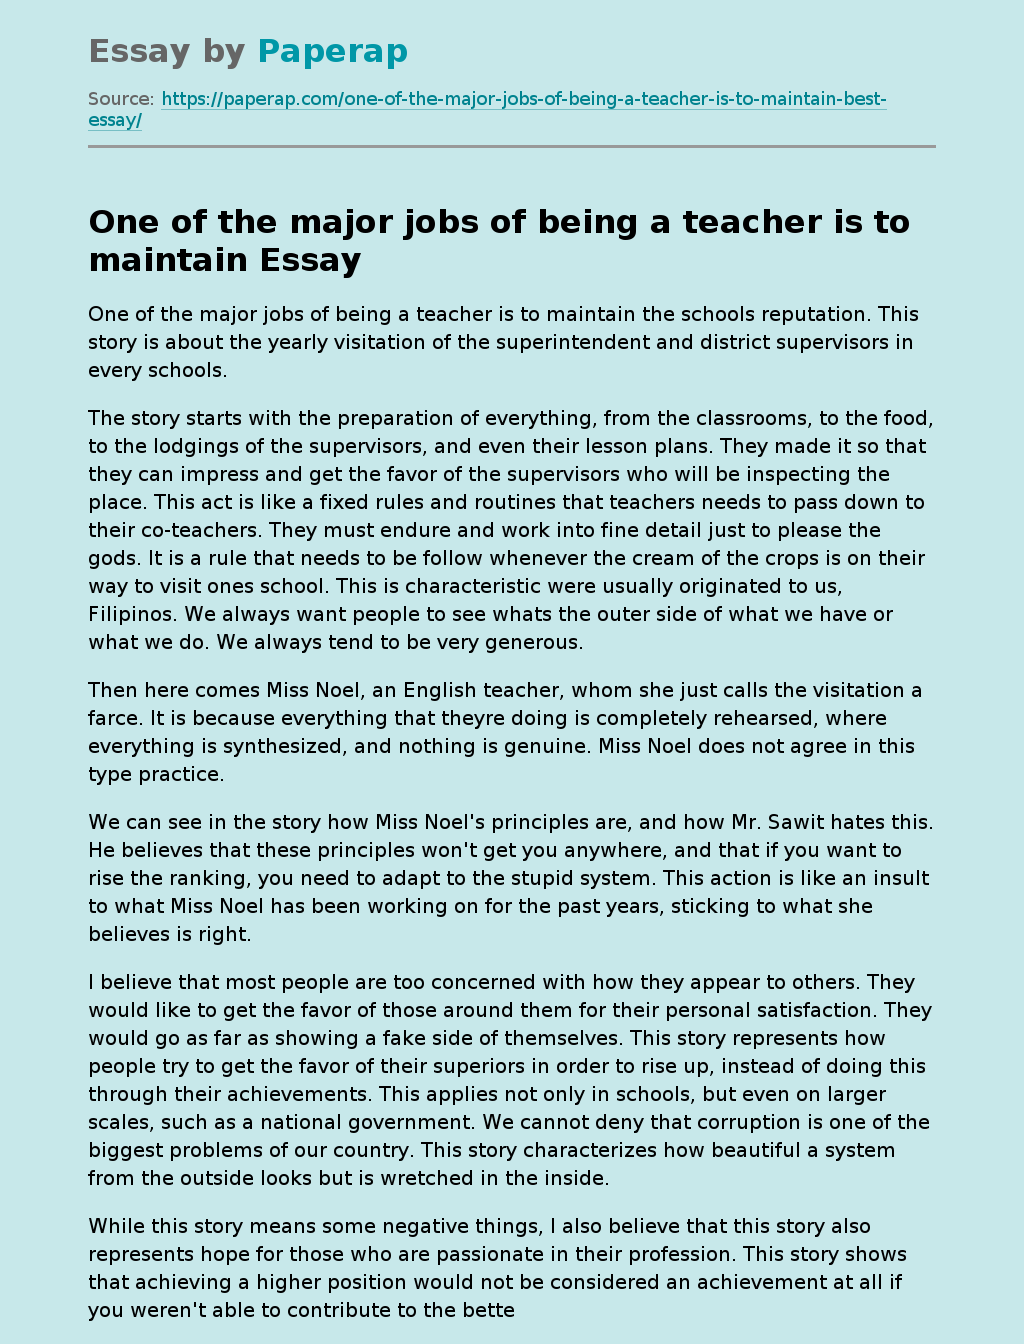 One of the major jobs of being a teacher is to maintain